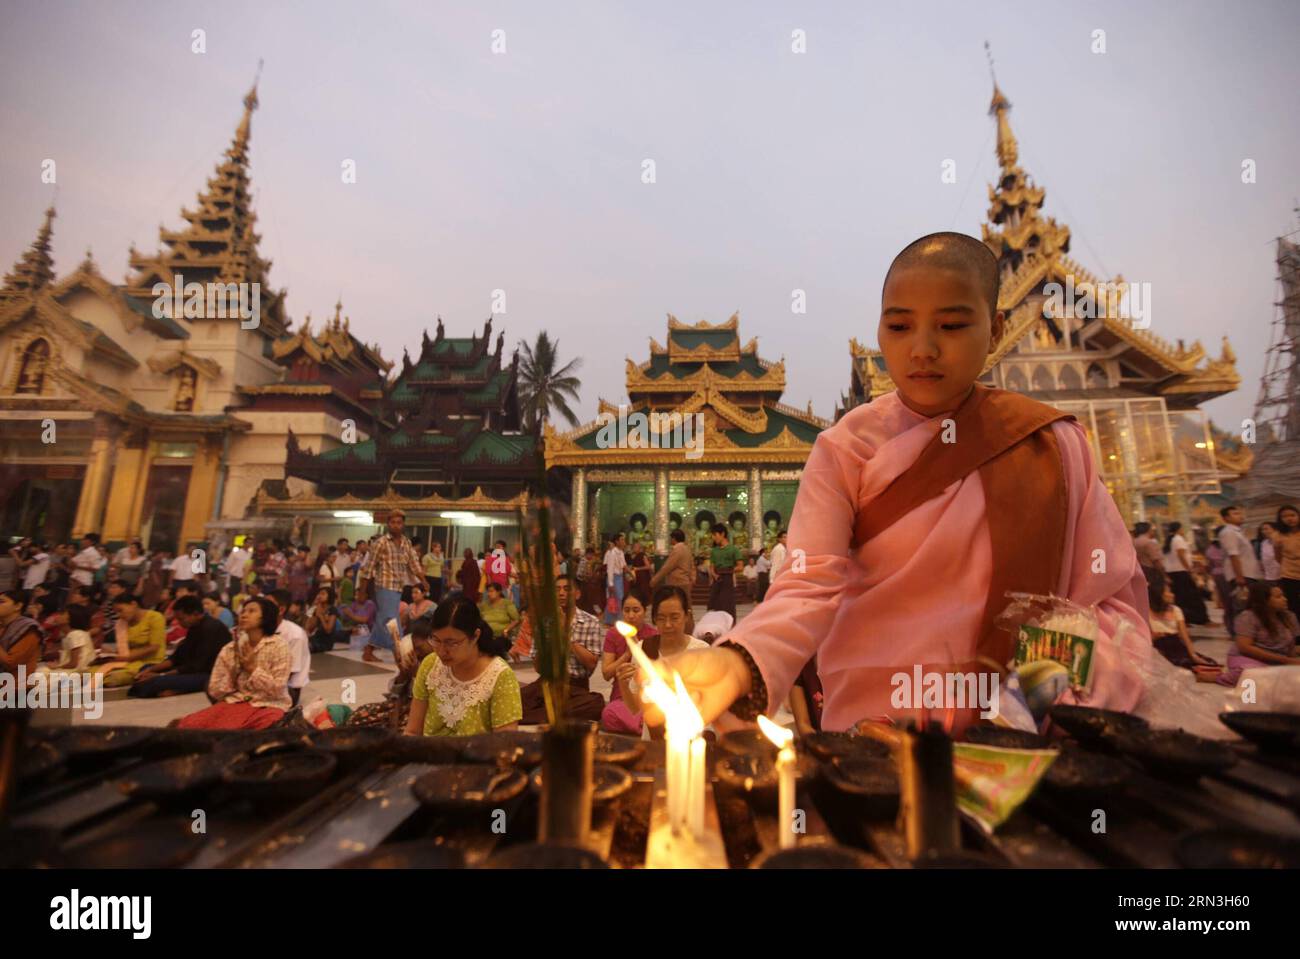 (150417) -- YANGON, April 17, 2015 -- A nun lights candles on the first day of Myanmar s new year at the world-famous Shwedagon Pagoda in Yangon, Myanmar, April 17, 2015. On the first day of Myanmar s new year, people in the country used to perform meritorious deeds and Buddhists, who account for the majority of the people, usually go to the pagodas, monasteries and meditation centers where they practice meditation. ) MYANMAR-YANGON-NEW YEAR UxAung PUBLICATIONxNOTxINxCHN   Yangon April 17 2015 a now Lights Candles ON The First Day of Myanmar S New Year AT The World Famous Shwedagon Pagoda in Y Stock Photo